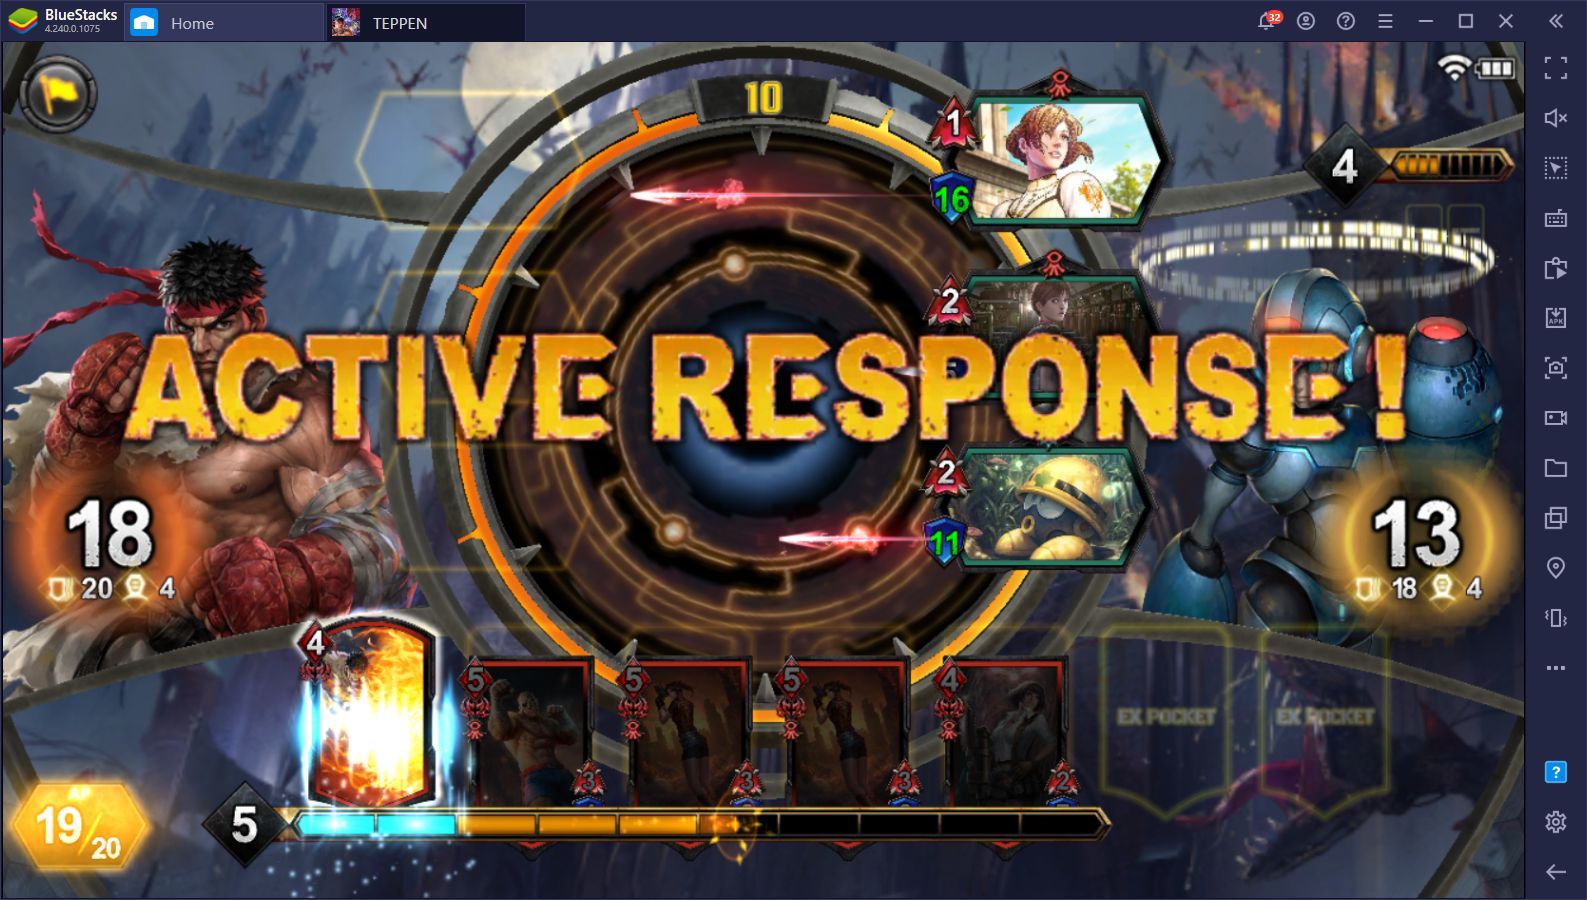 Beginner’s Guide for TEPPEN - The Basic Elements in This Mobile CCG